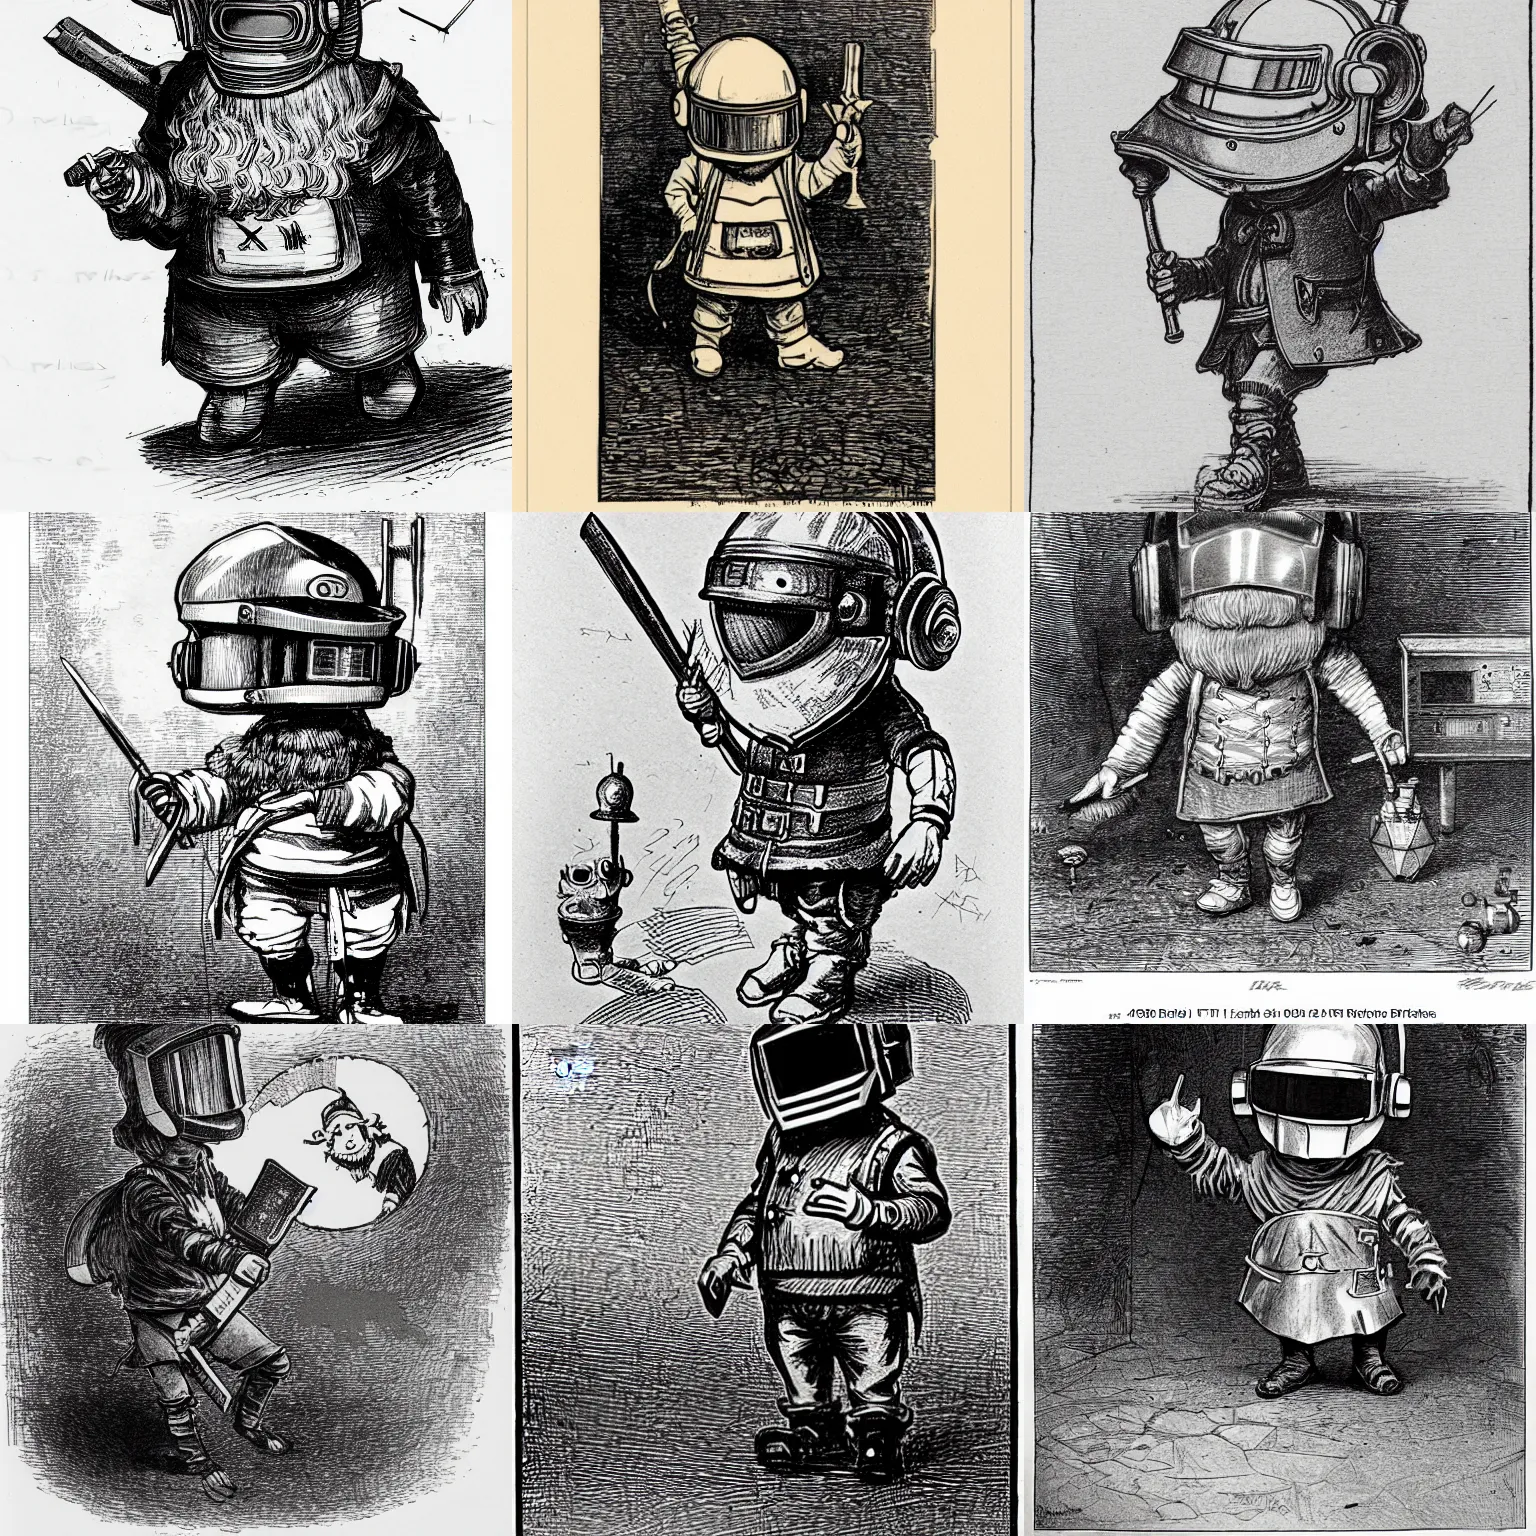 Prompt: sketch of a cute chibi dnd gnome inventor tinkerer wearing a daft punk helmet and walking, etching by louis le breton, 1 8 6 9, 1 2 0 0 dpi scan